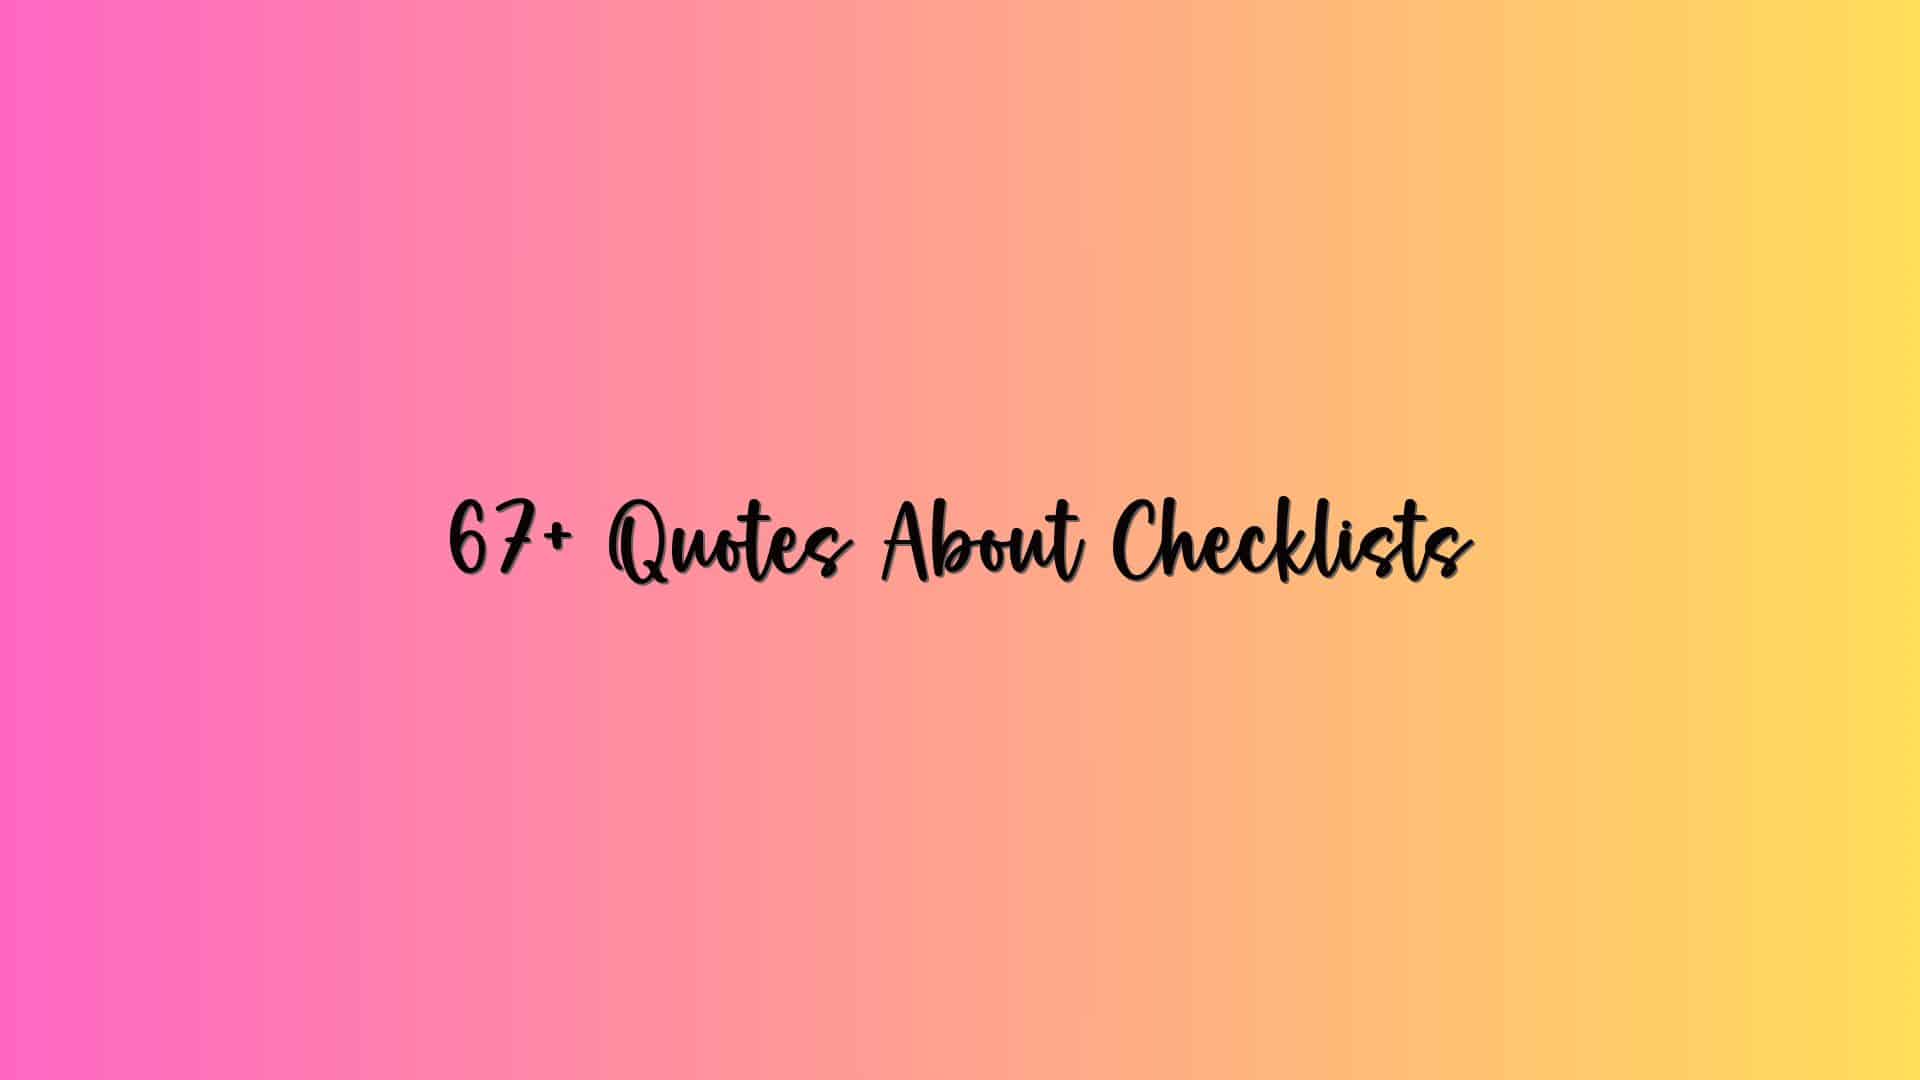 67+ Quotes About Checklists